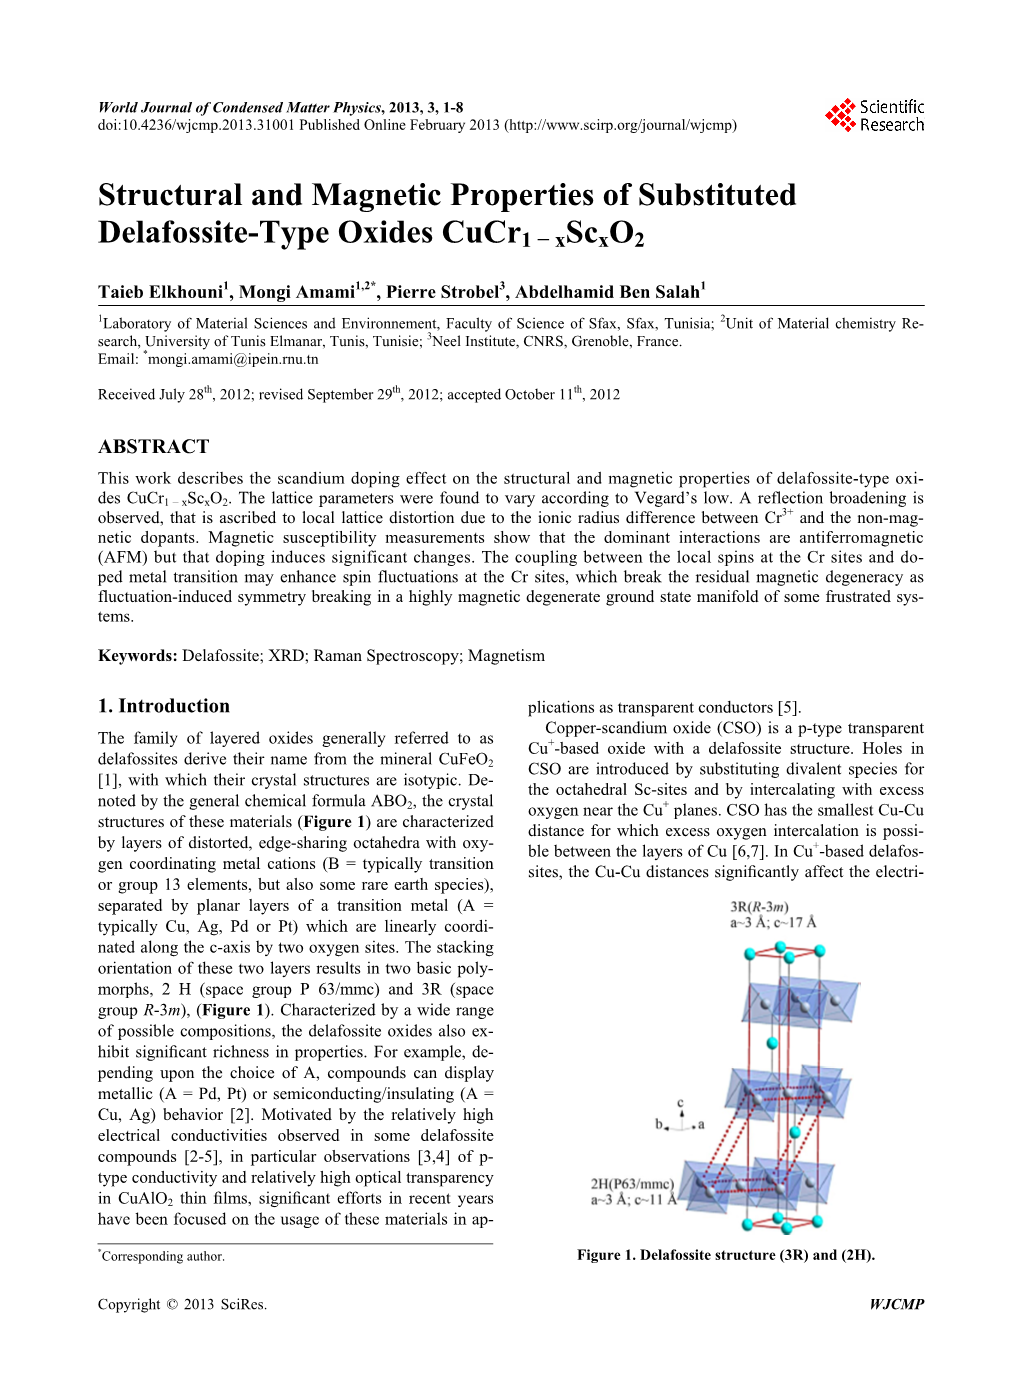 Structural and Magnetic Properties of Substituted Delafossite-Type Oxides Cucr1 − Xscxo2